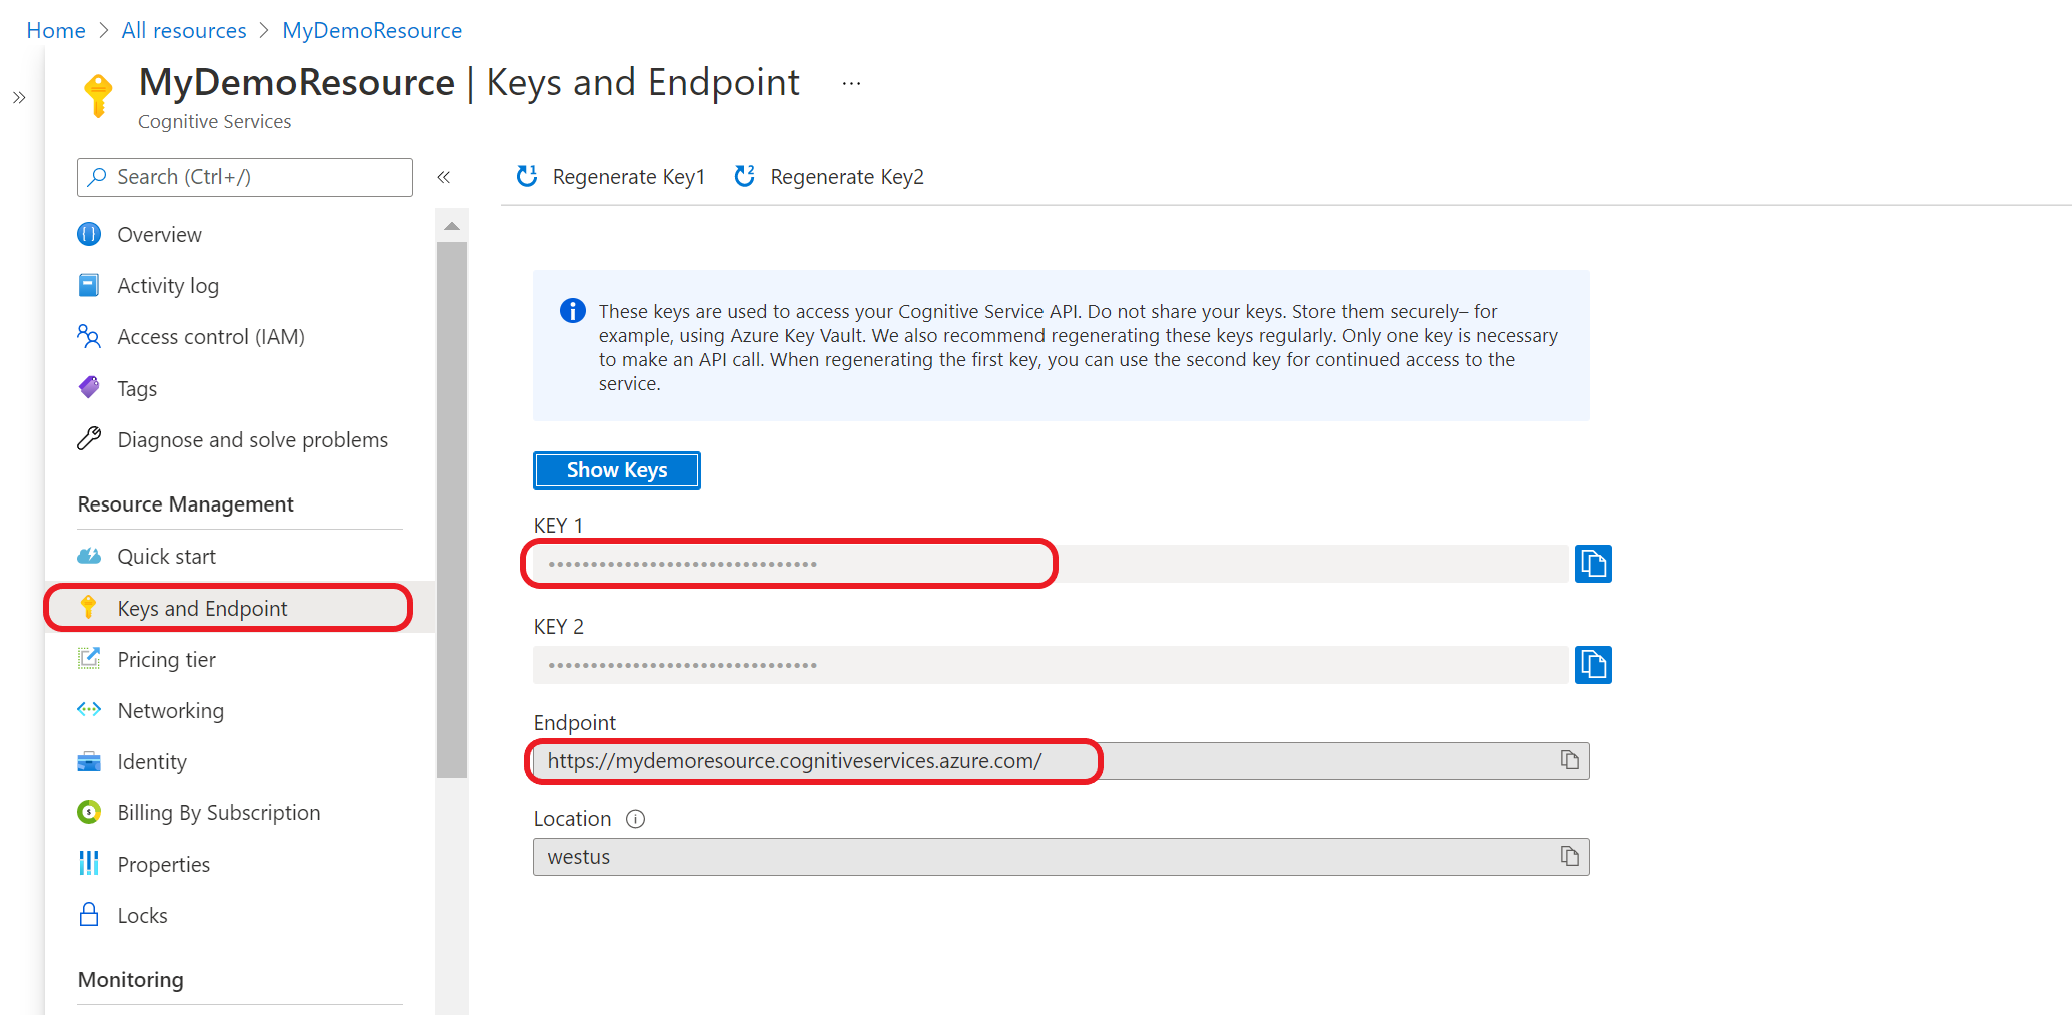 A screenshot showing the key and endpoint page in the Azure portal.